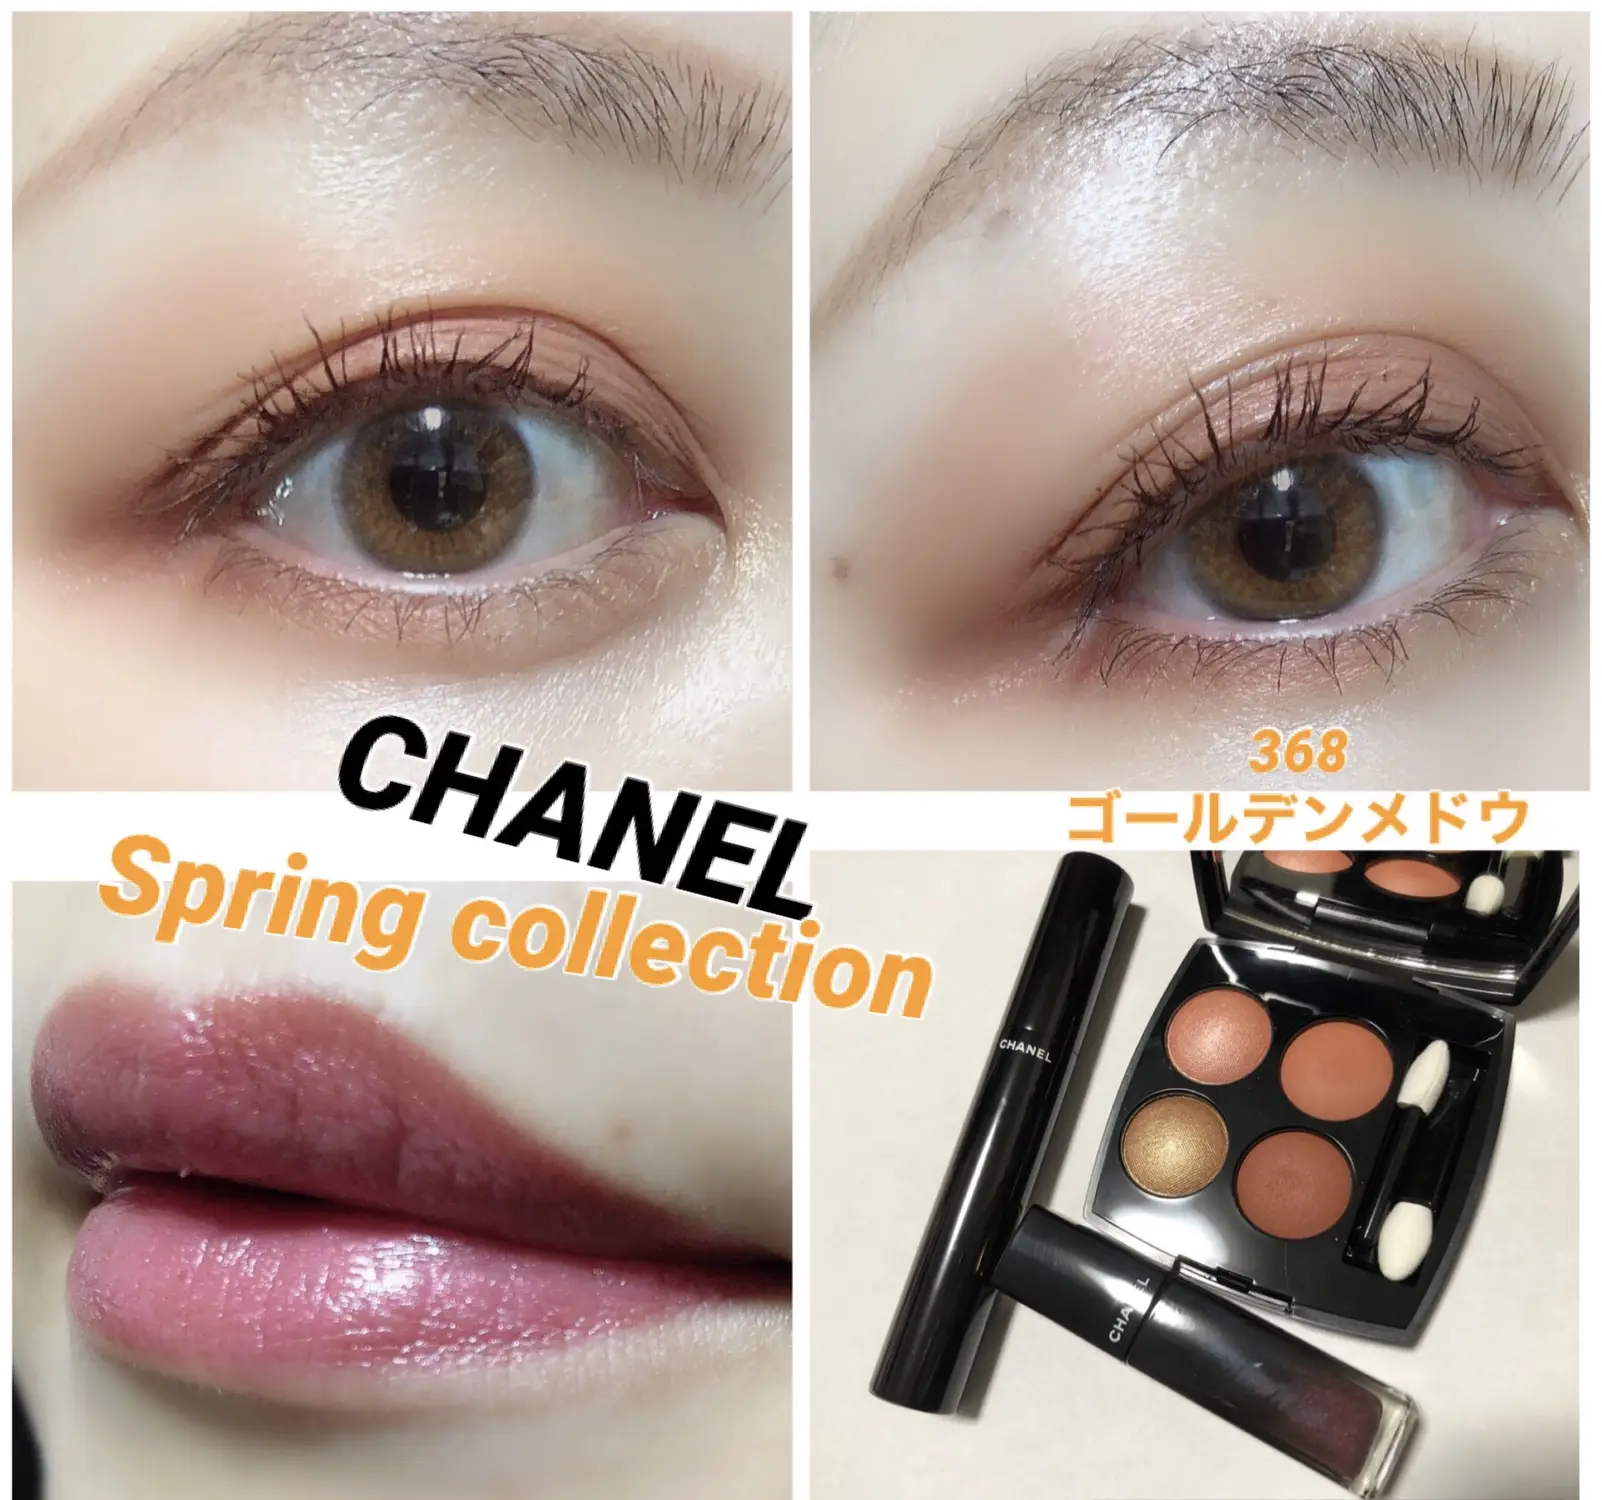 CHANEL Spring Collection ♡ Make up with Quatre 368 Golden Meadow, Gallery  posted by miwa_cosume_8_9